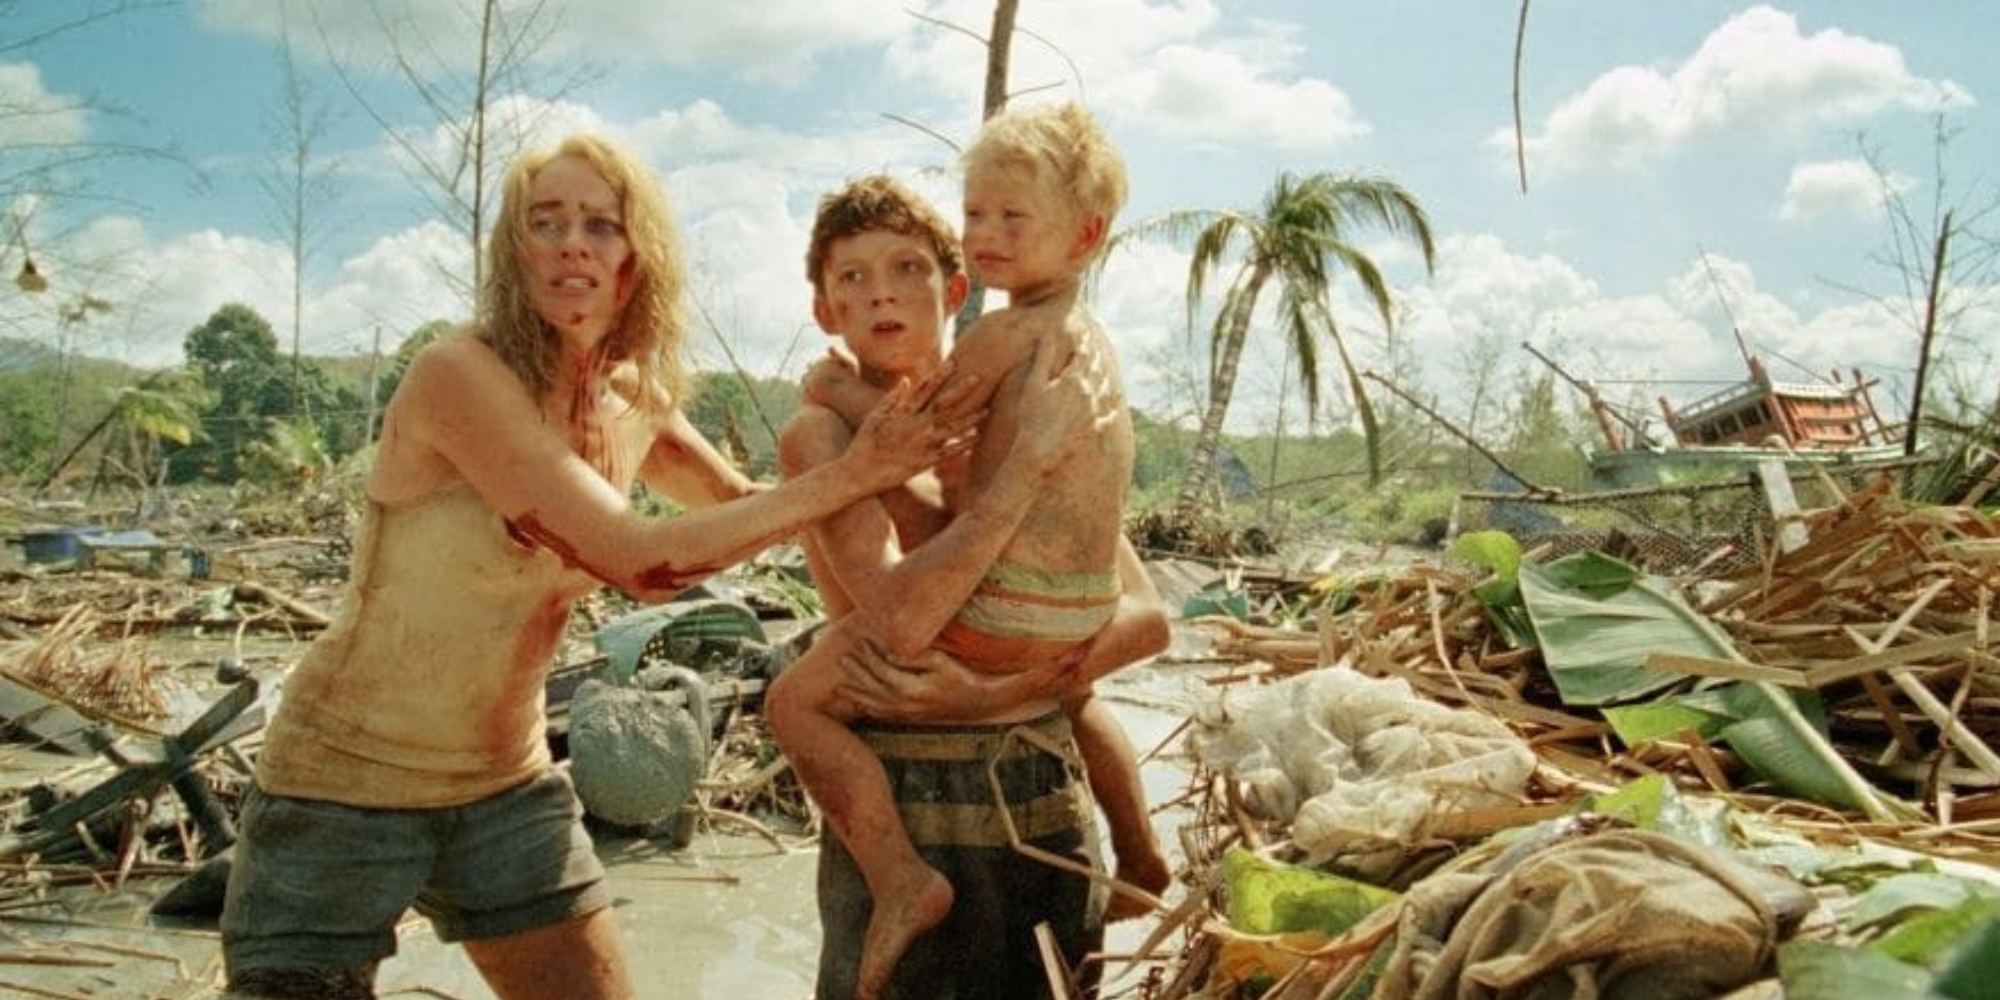 Tom Holland and Naomi Watts in 'The Impossible'